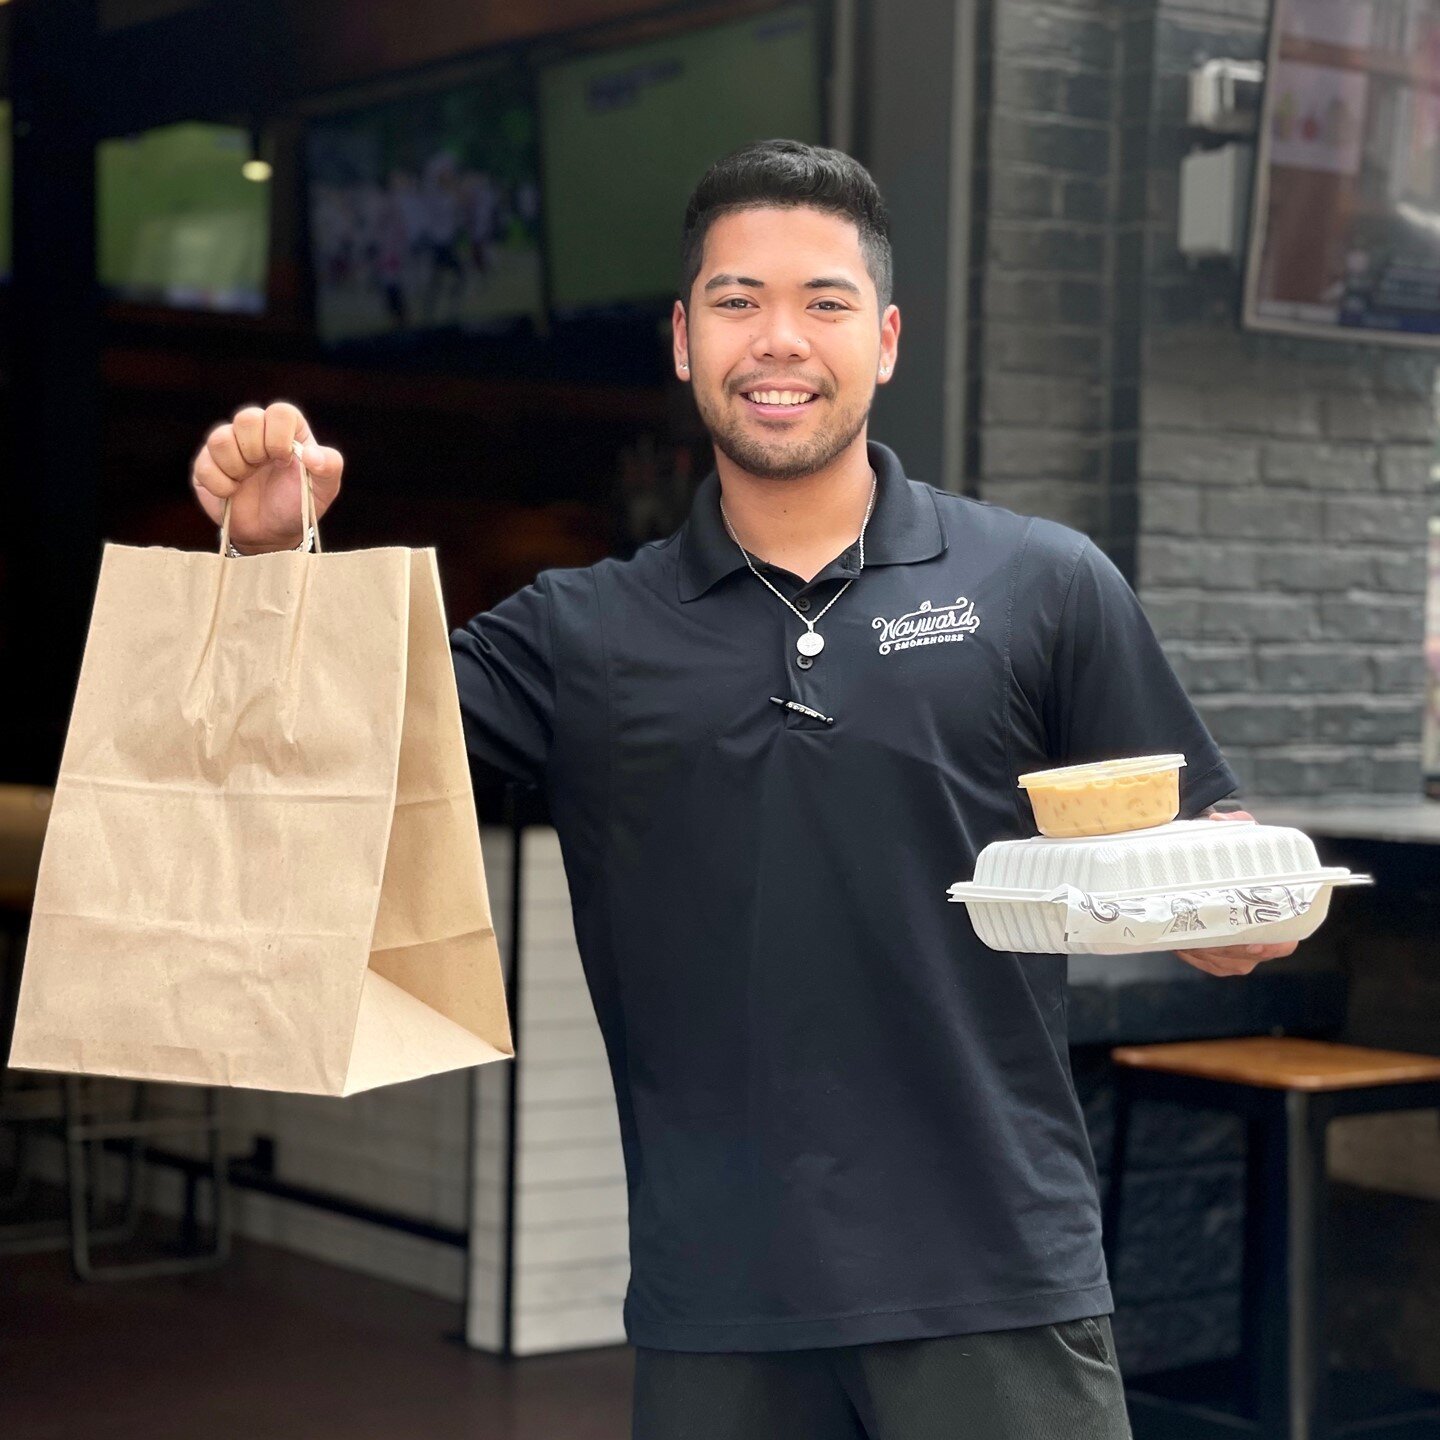 Happy #takeouttuesday everyone!
🍴
Whether you&rsquo;re getting lunch for yourself or catering for the office, we have you covered!
🍴
Click the link in our bio for our carryout options! 🥳

&bull;
&bull;
&bull;

#baltimorebuzz #mybmore #takeout #tak